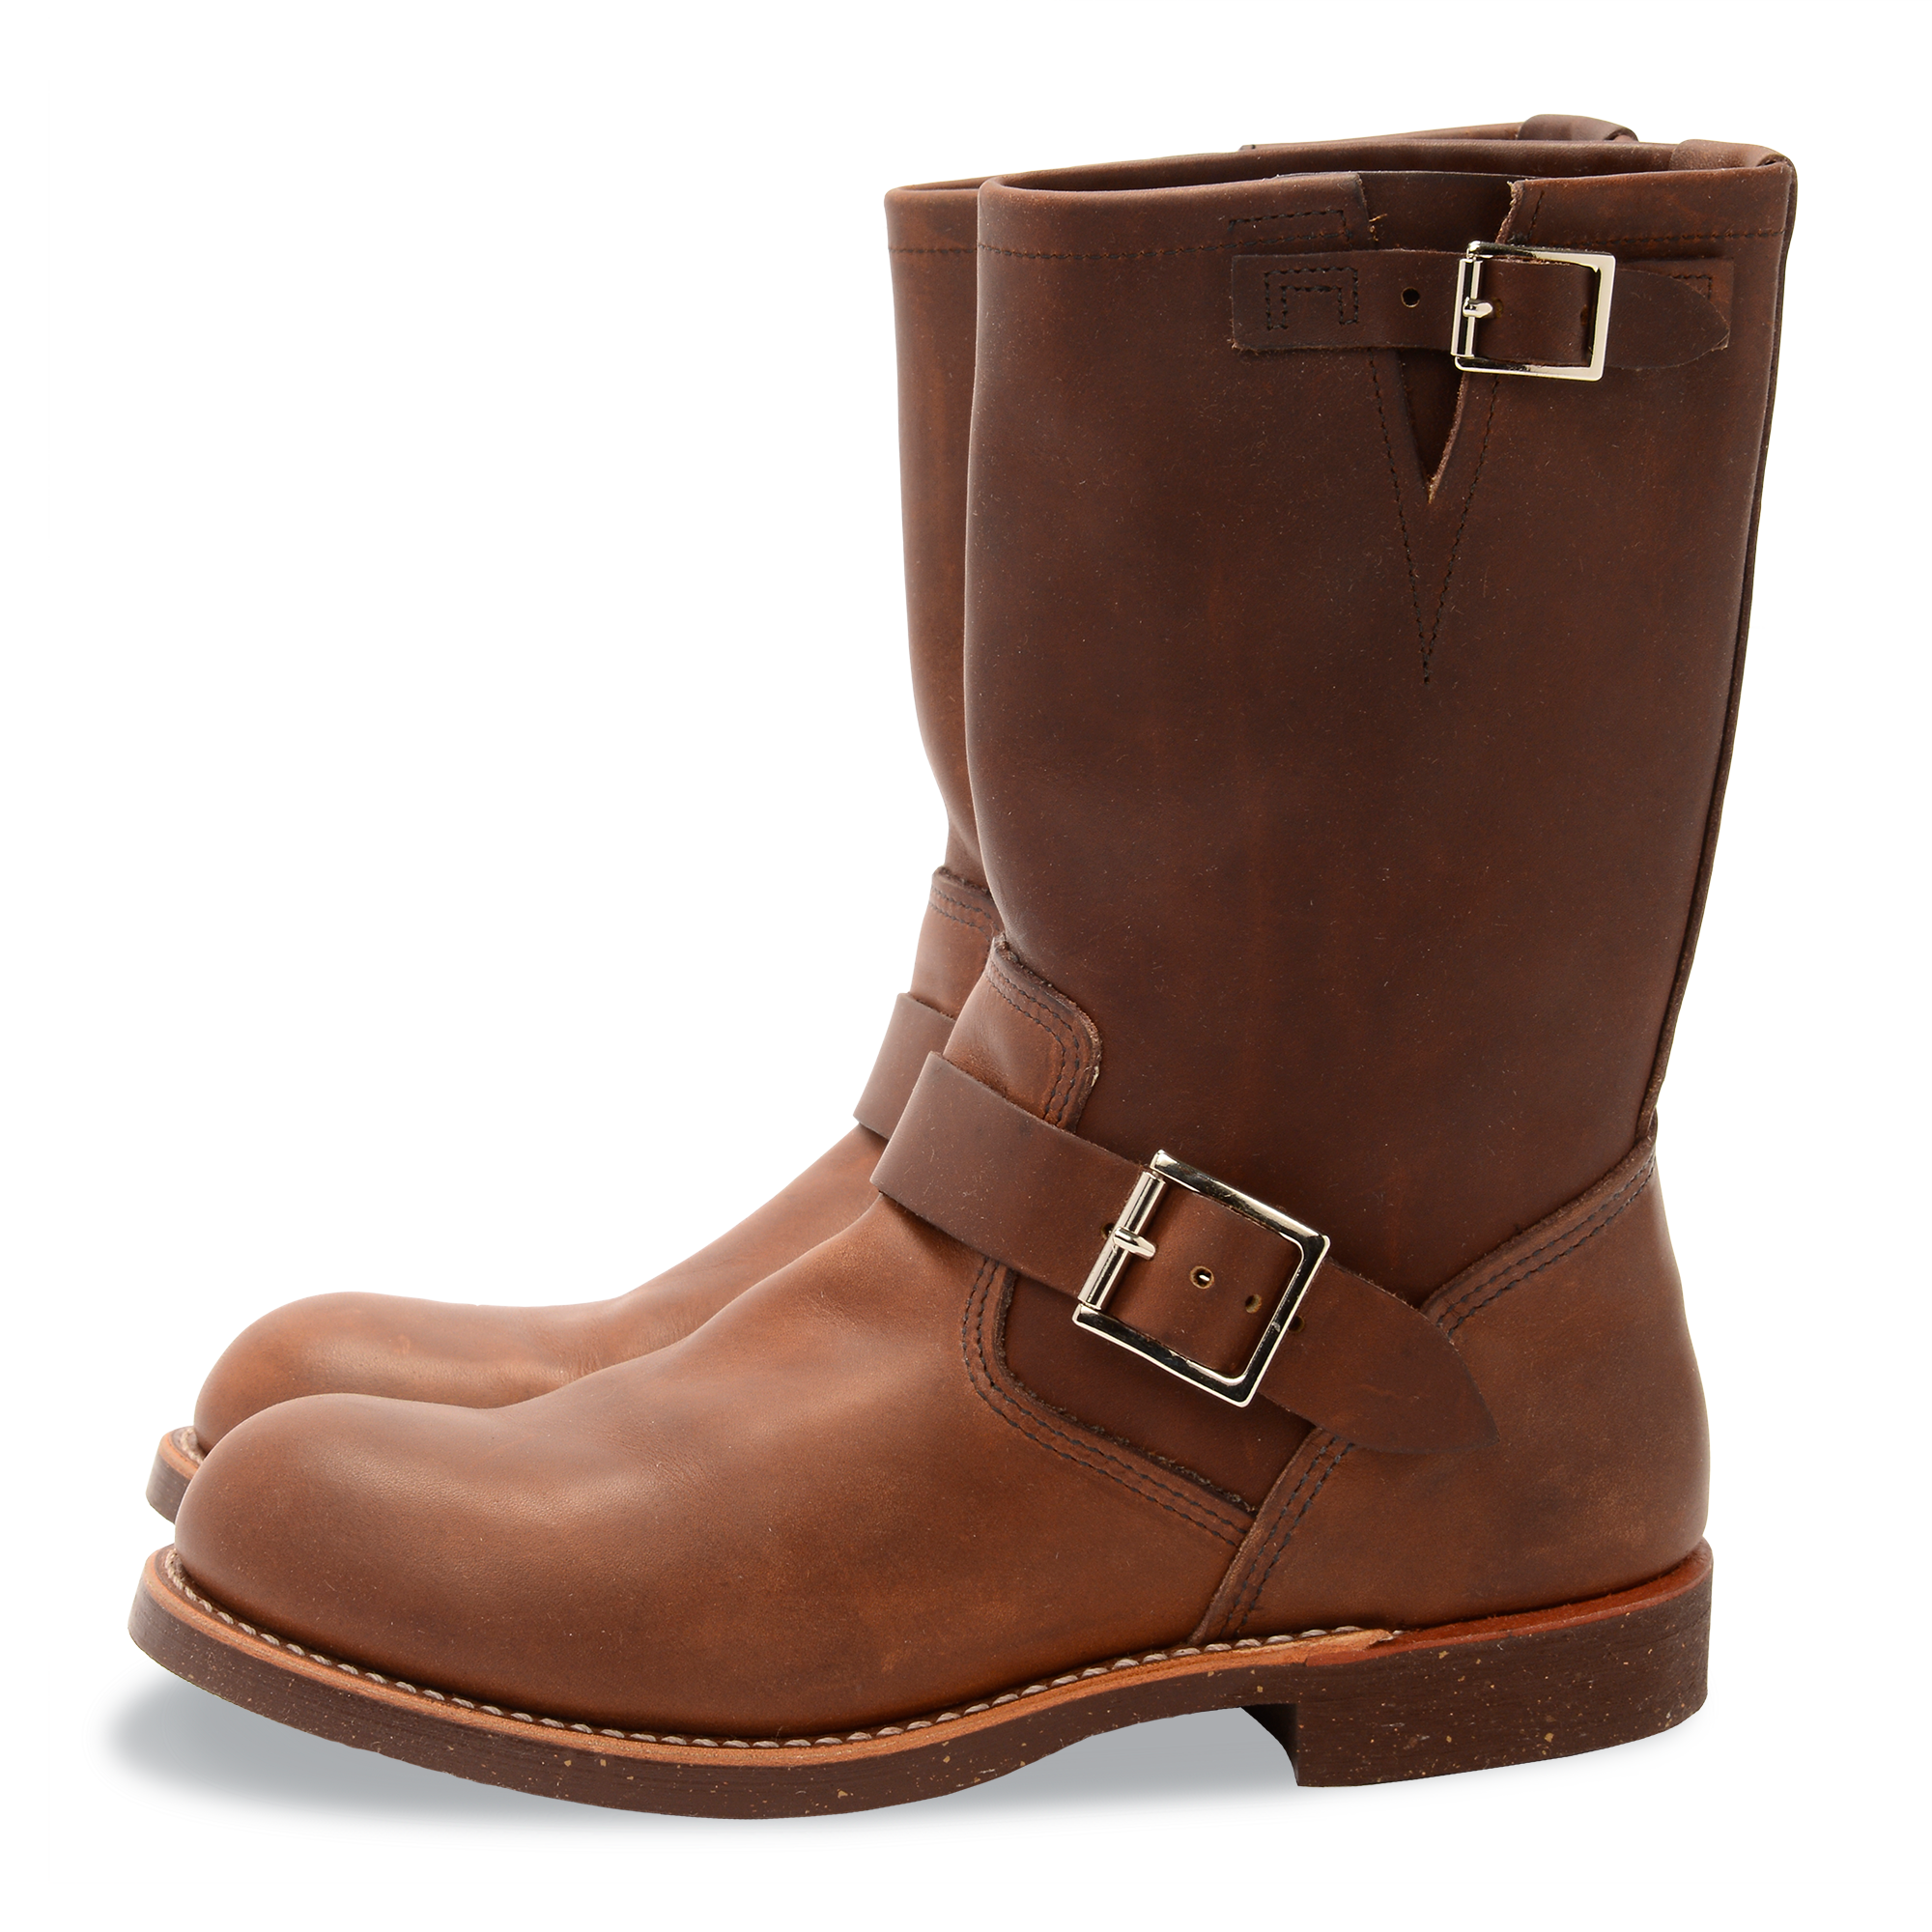 Brown redwing engineer boots